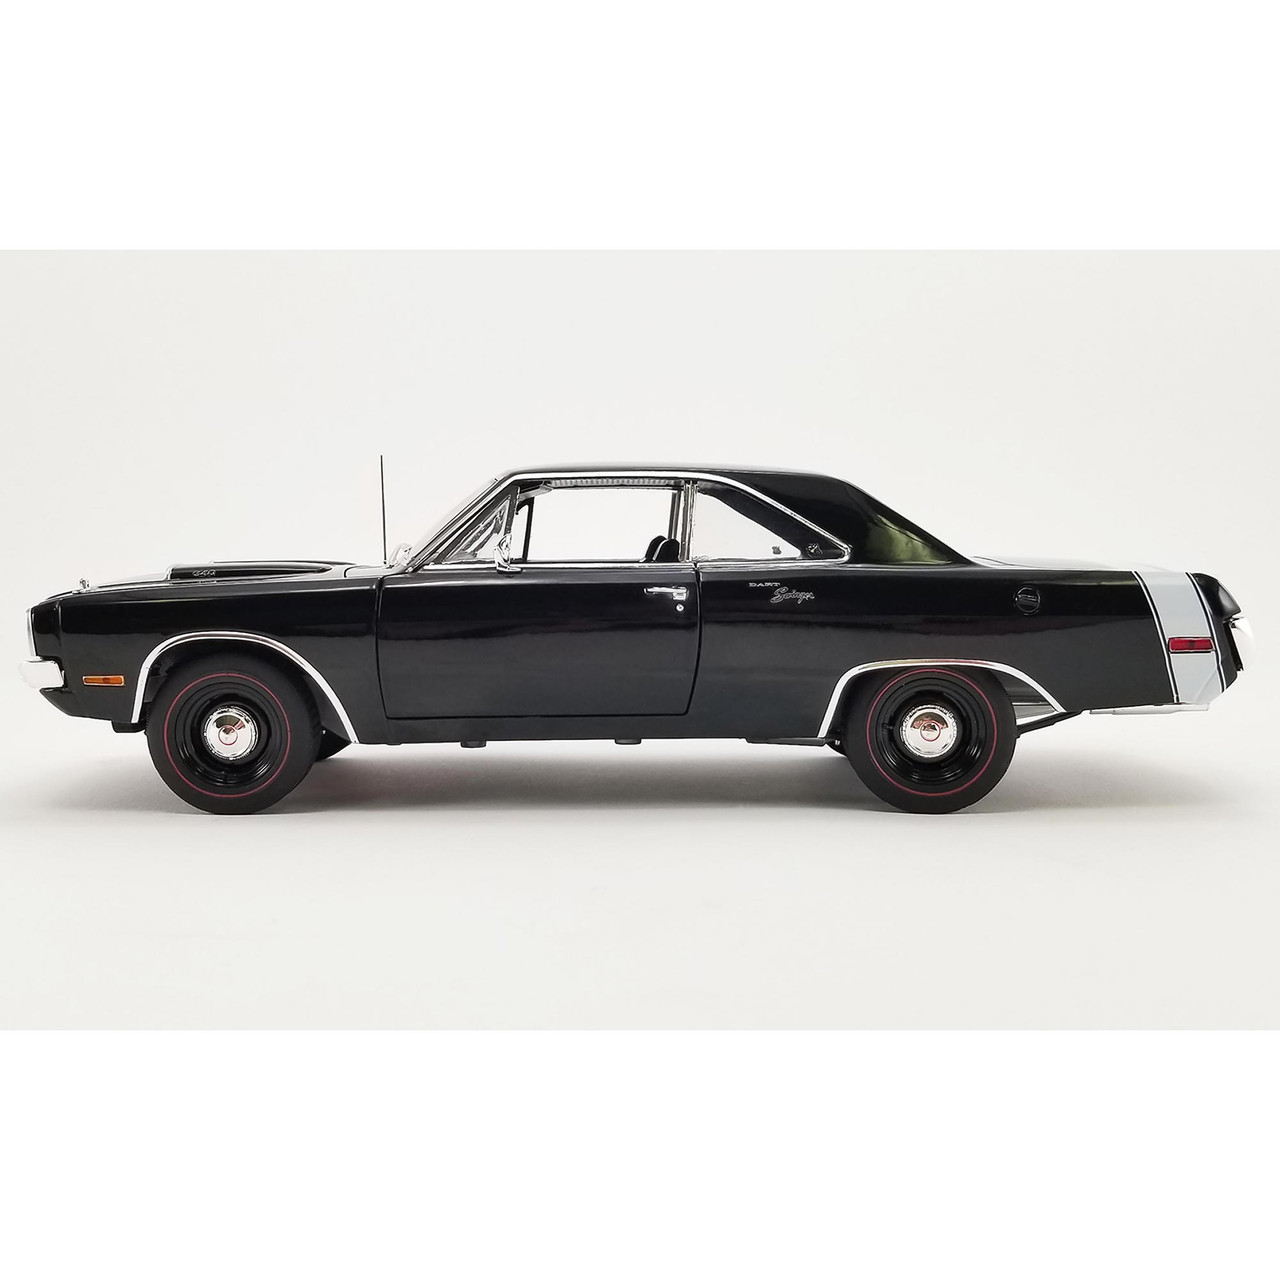 1970 Dodge Dart Swinger - Hardtop 118 Scale Diecast Model by Acme Fairfield Collectibles